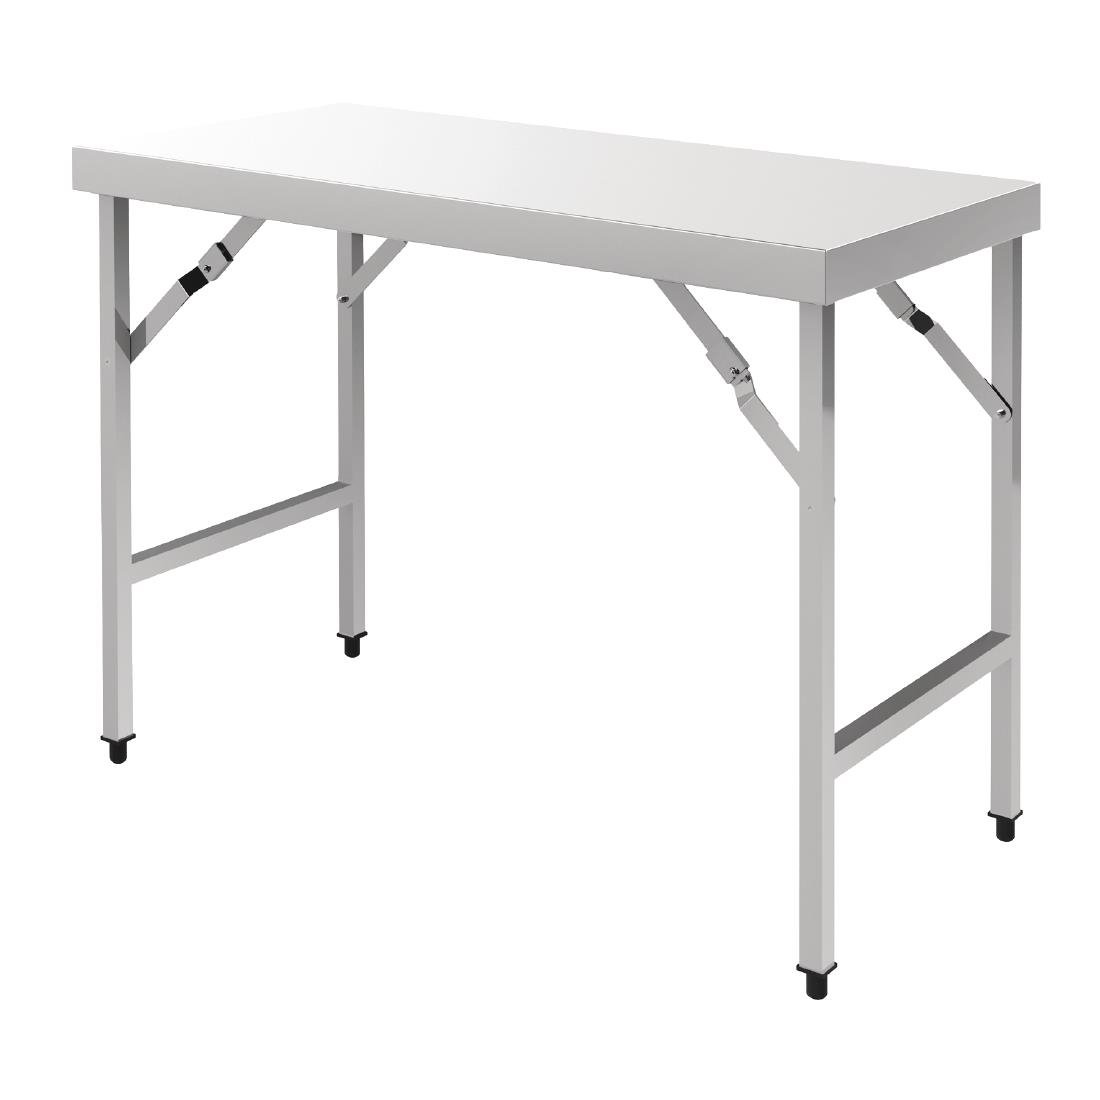 Vogue Stainless Steel Folding Table 1200mm